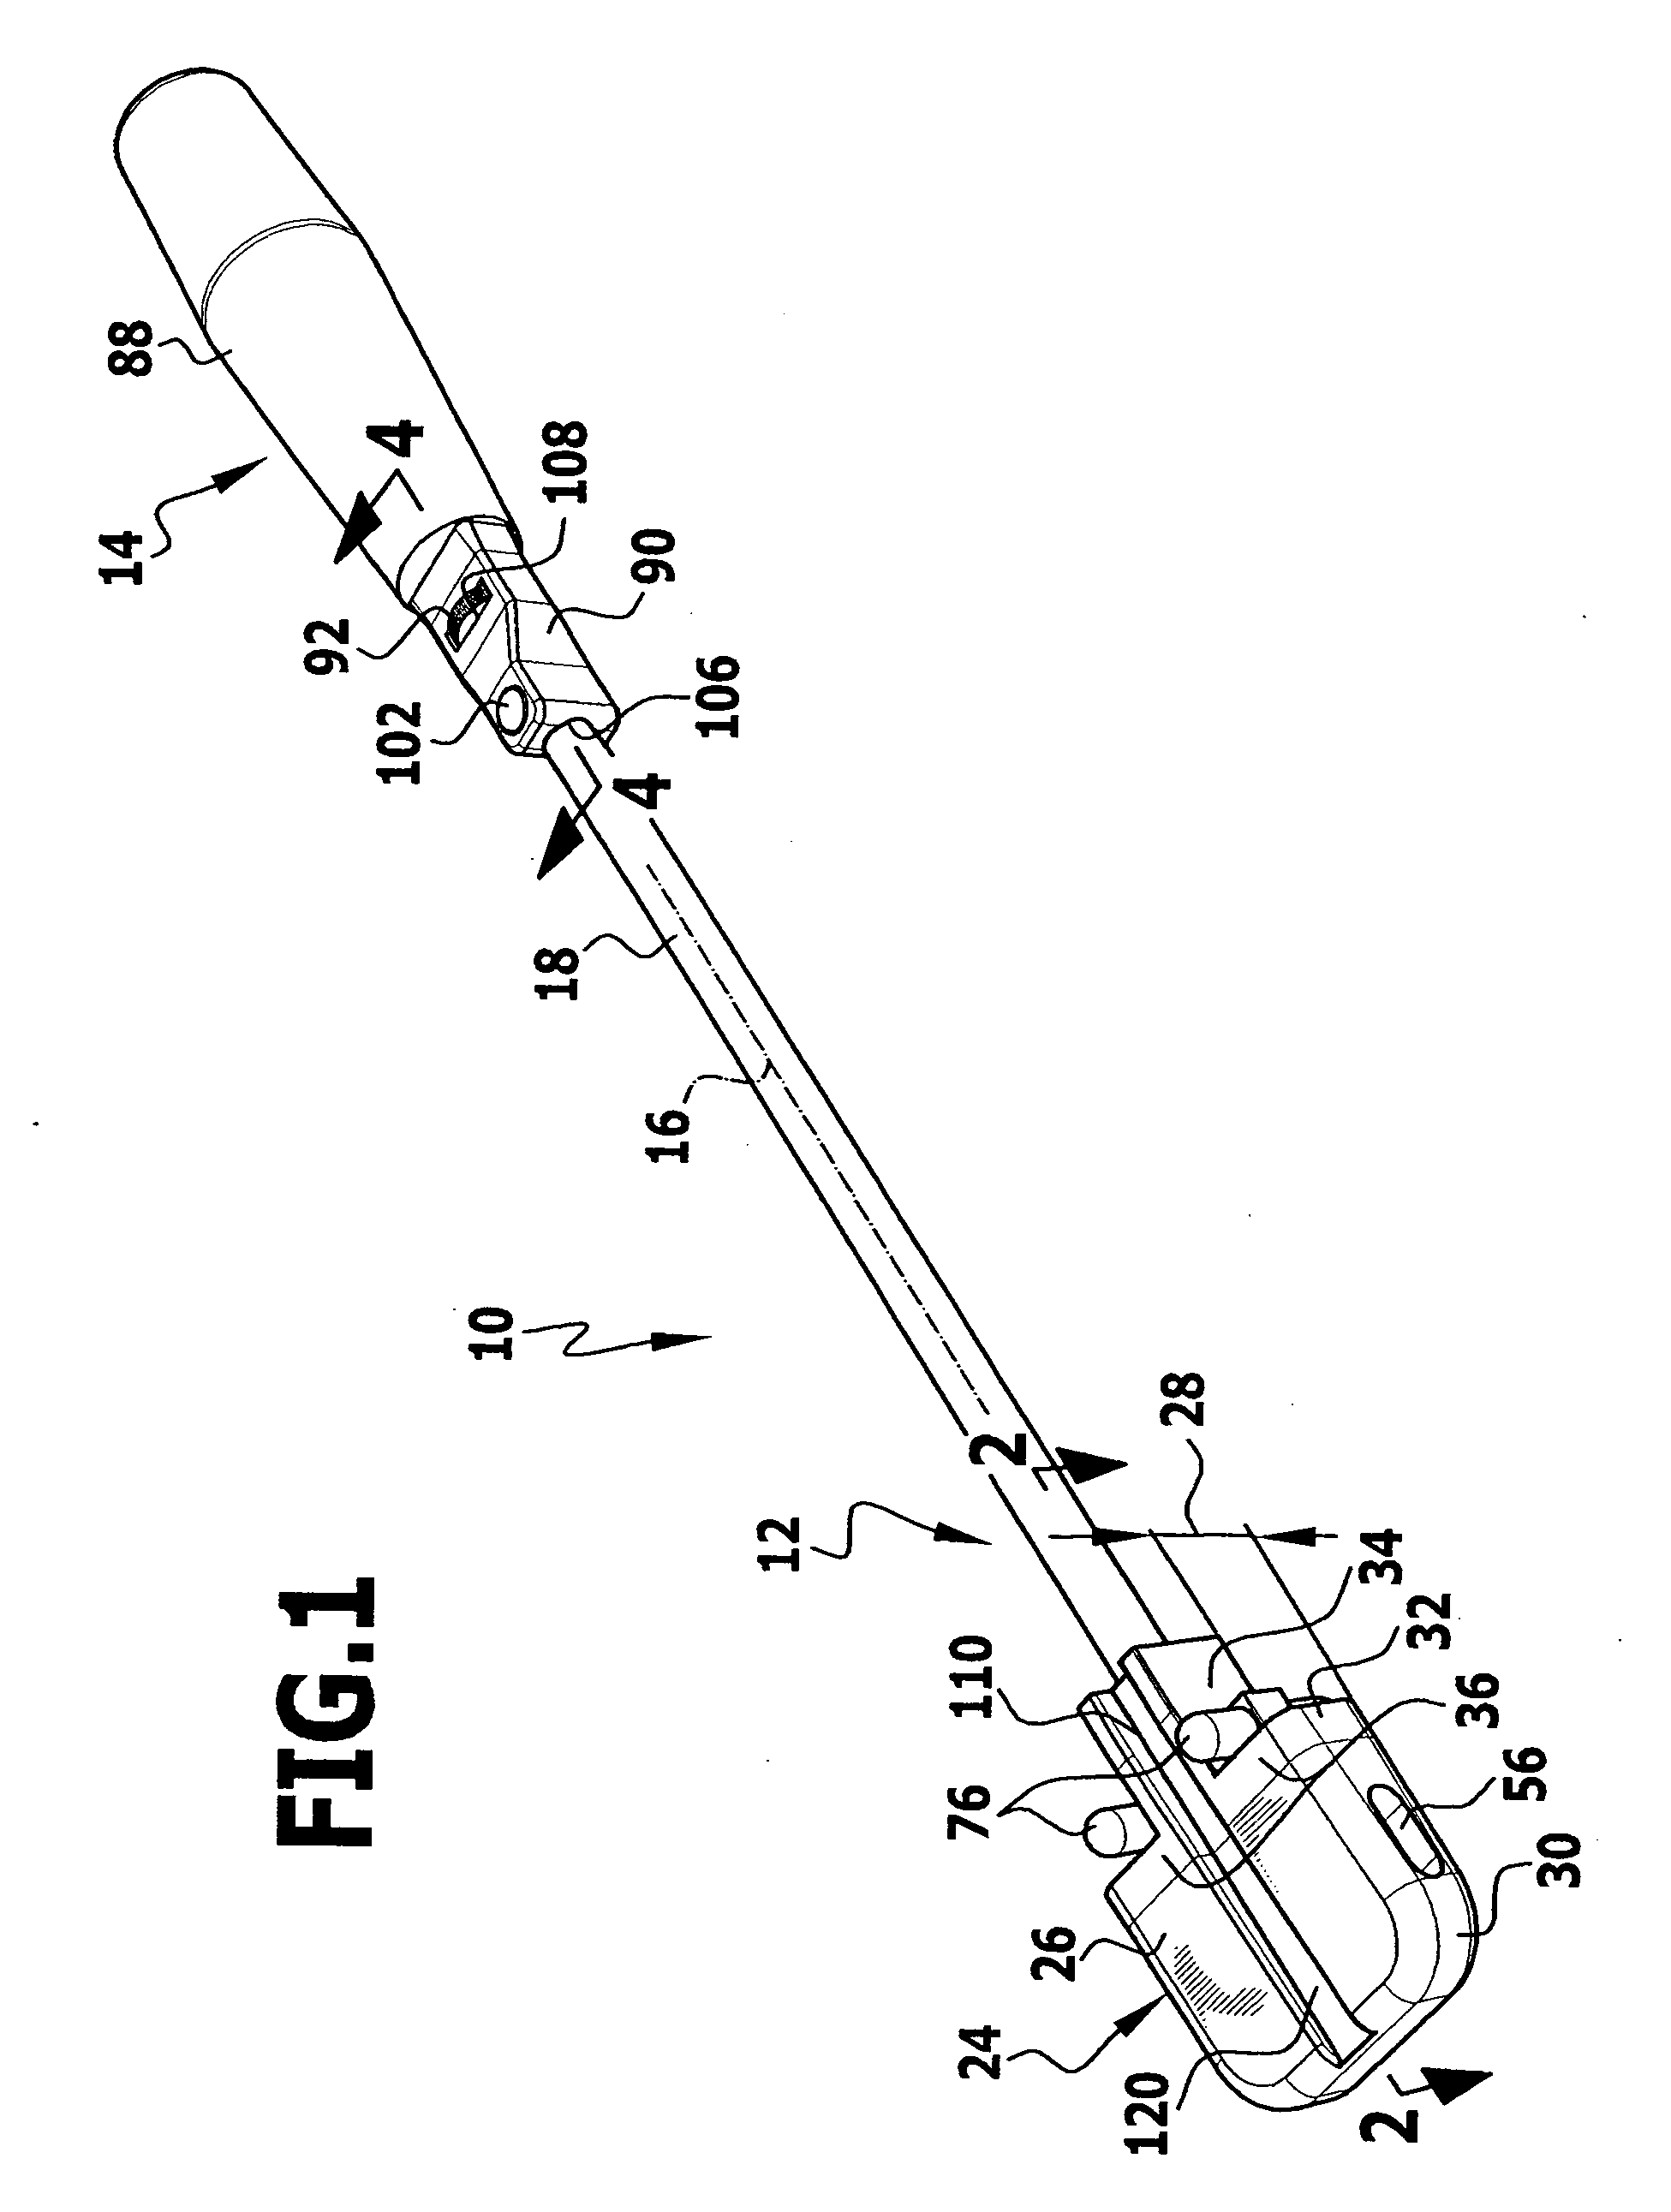 Surgical guiding instrument